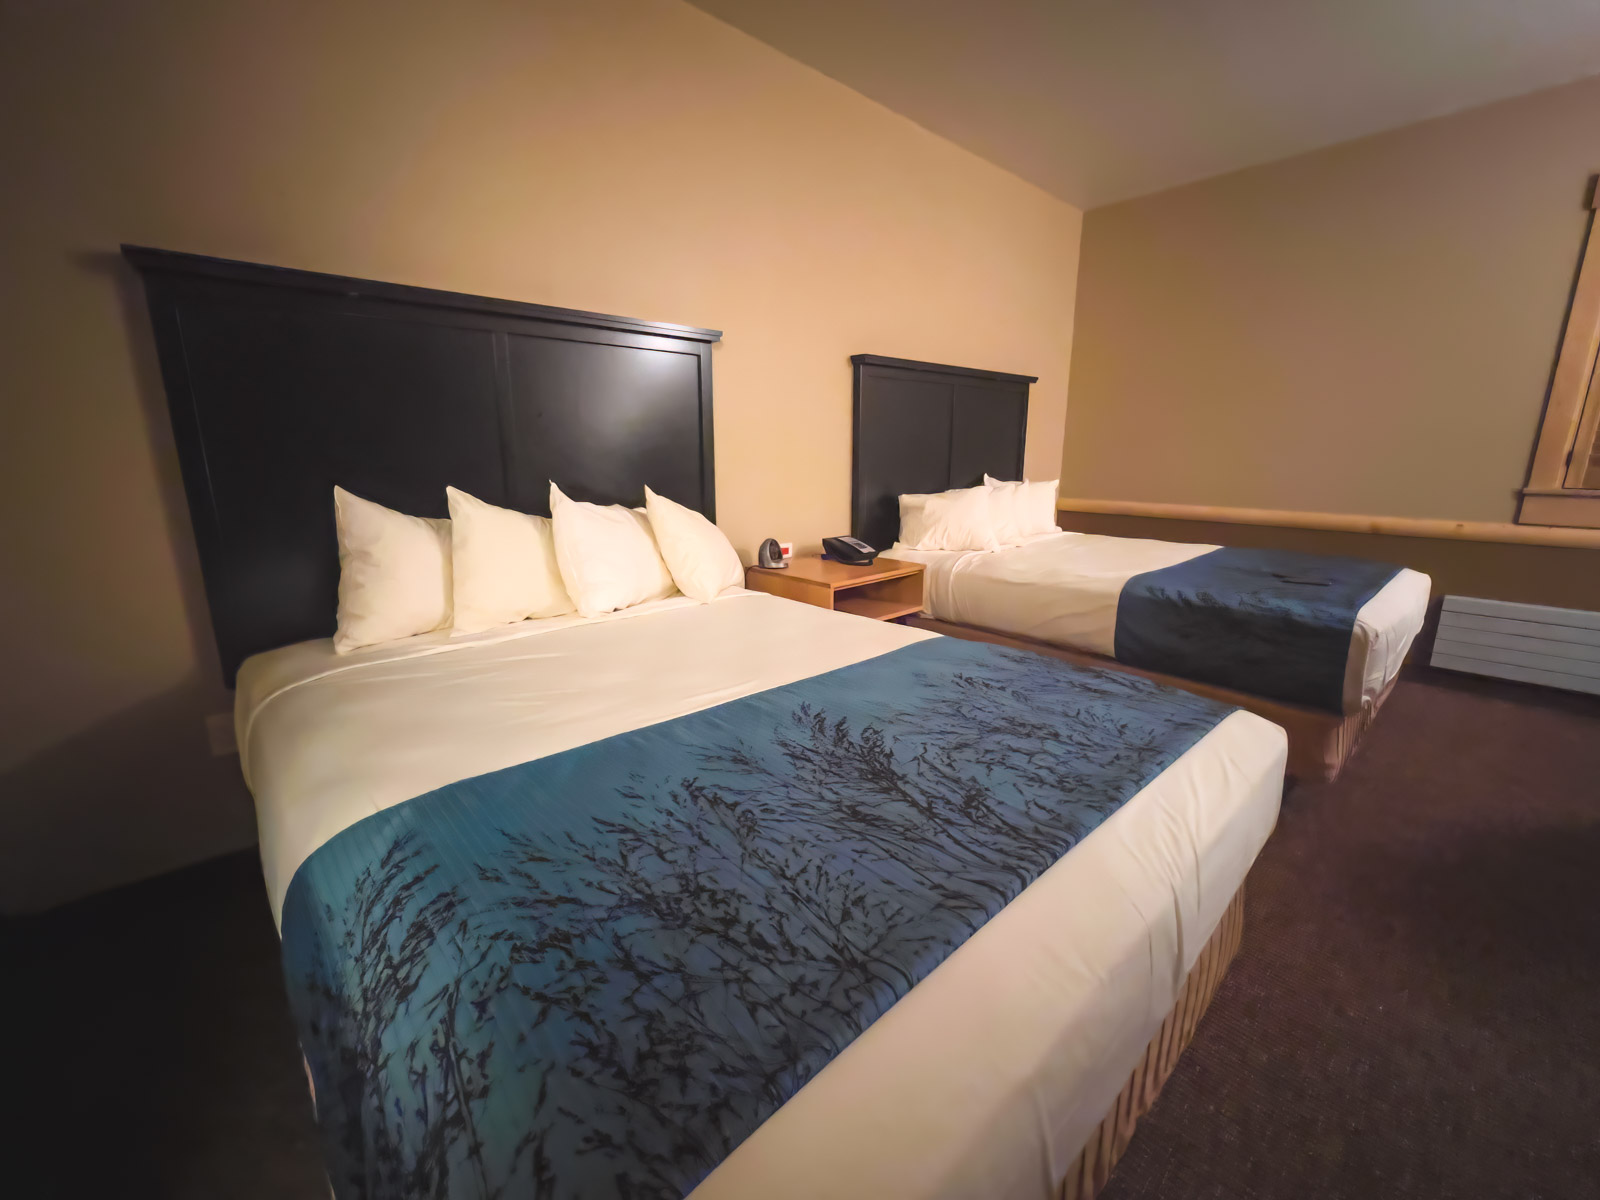 Things to do in Yellowstone National Park Accommodation